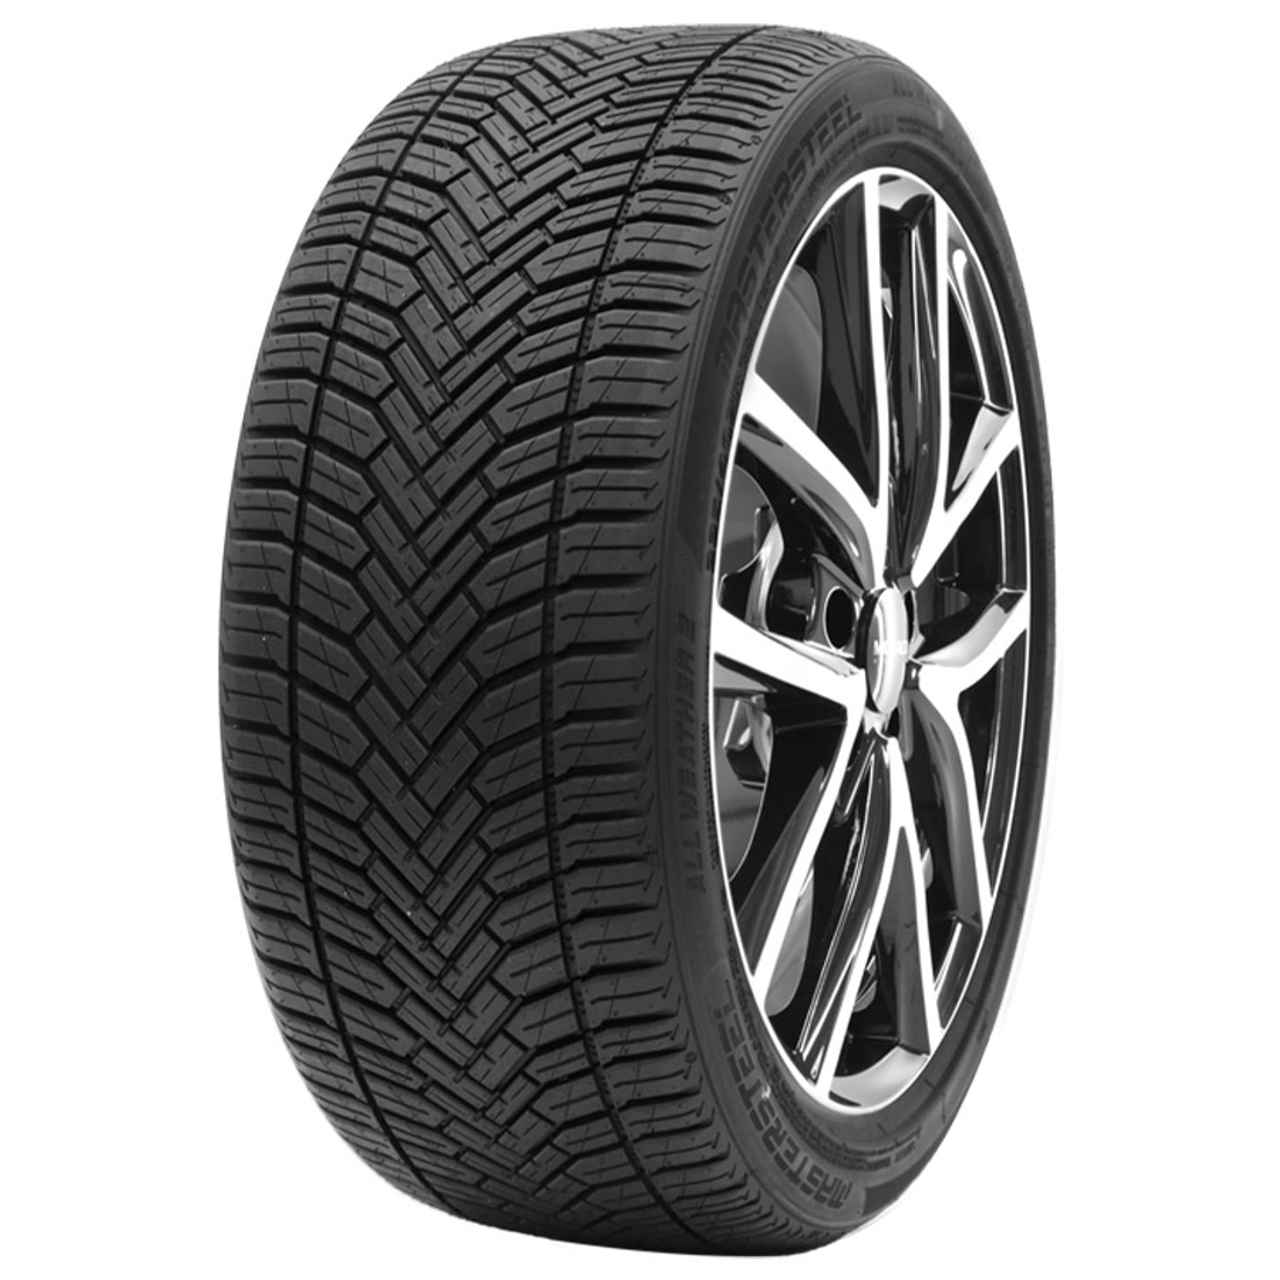 MASTERSTEEL ALL WEATHER 2 185/65R15 88H BSW